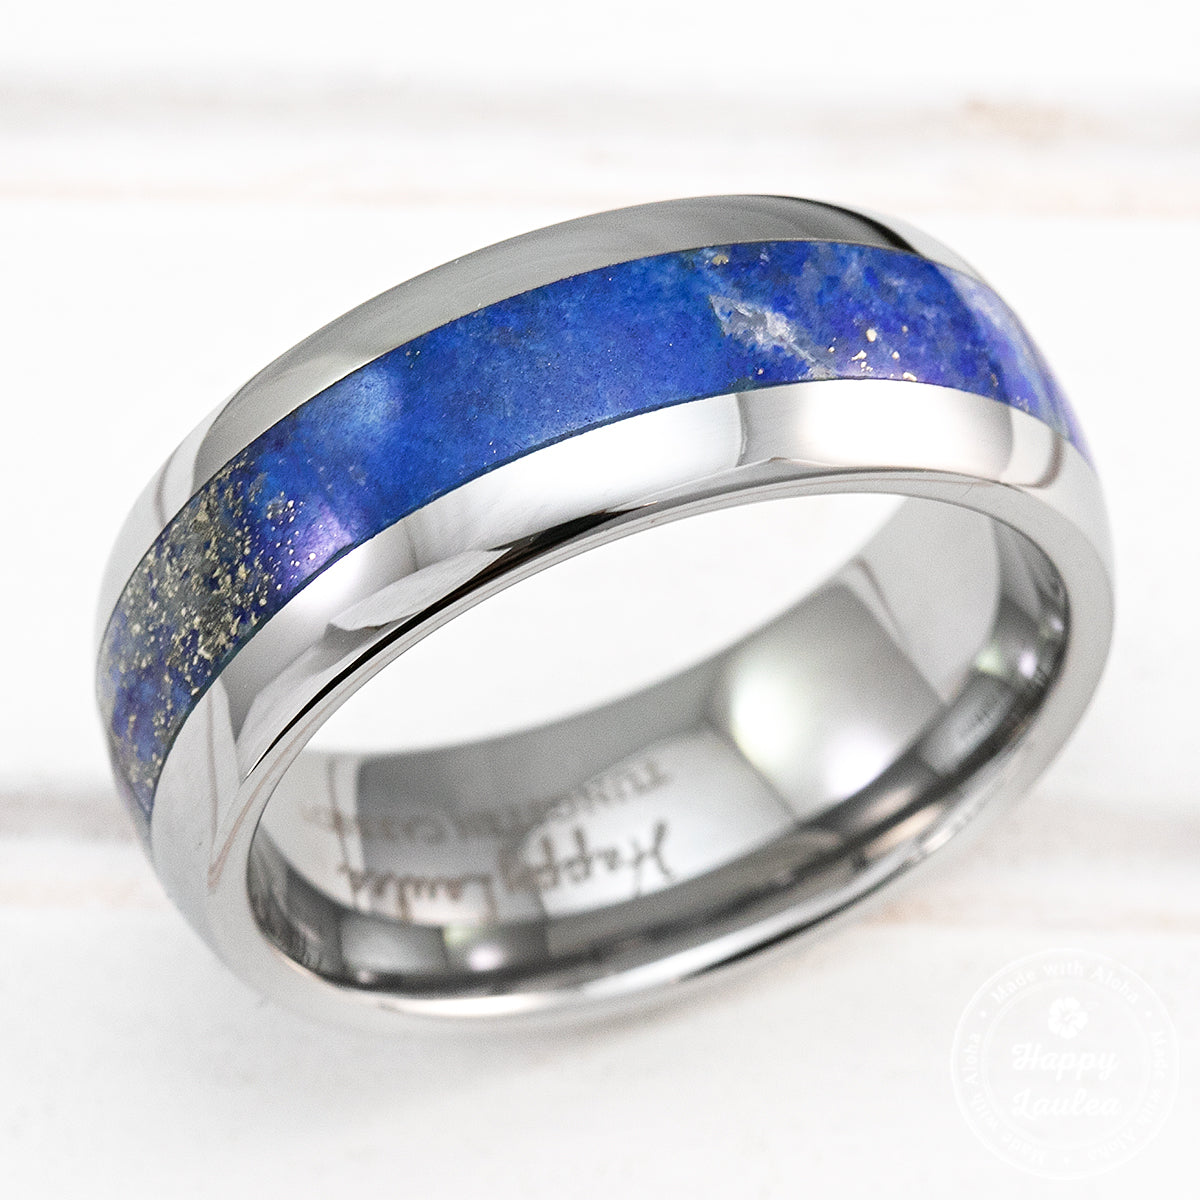 Pair of 4&8mm Tungsten Carbide Rings with Lapis Lazuli Inlay - Dome Shape, Comfort Fitment